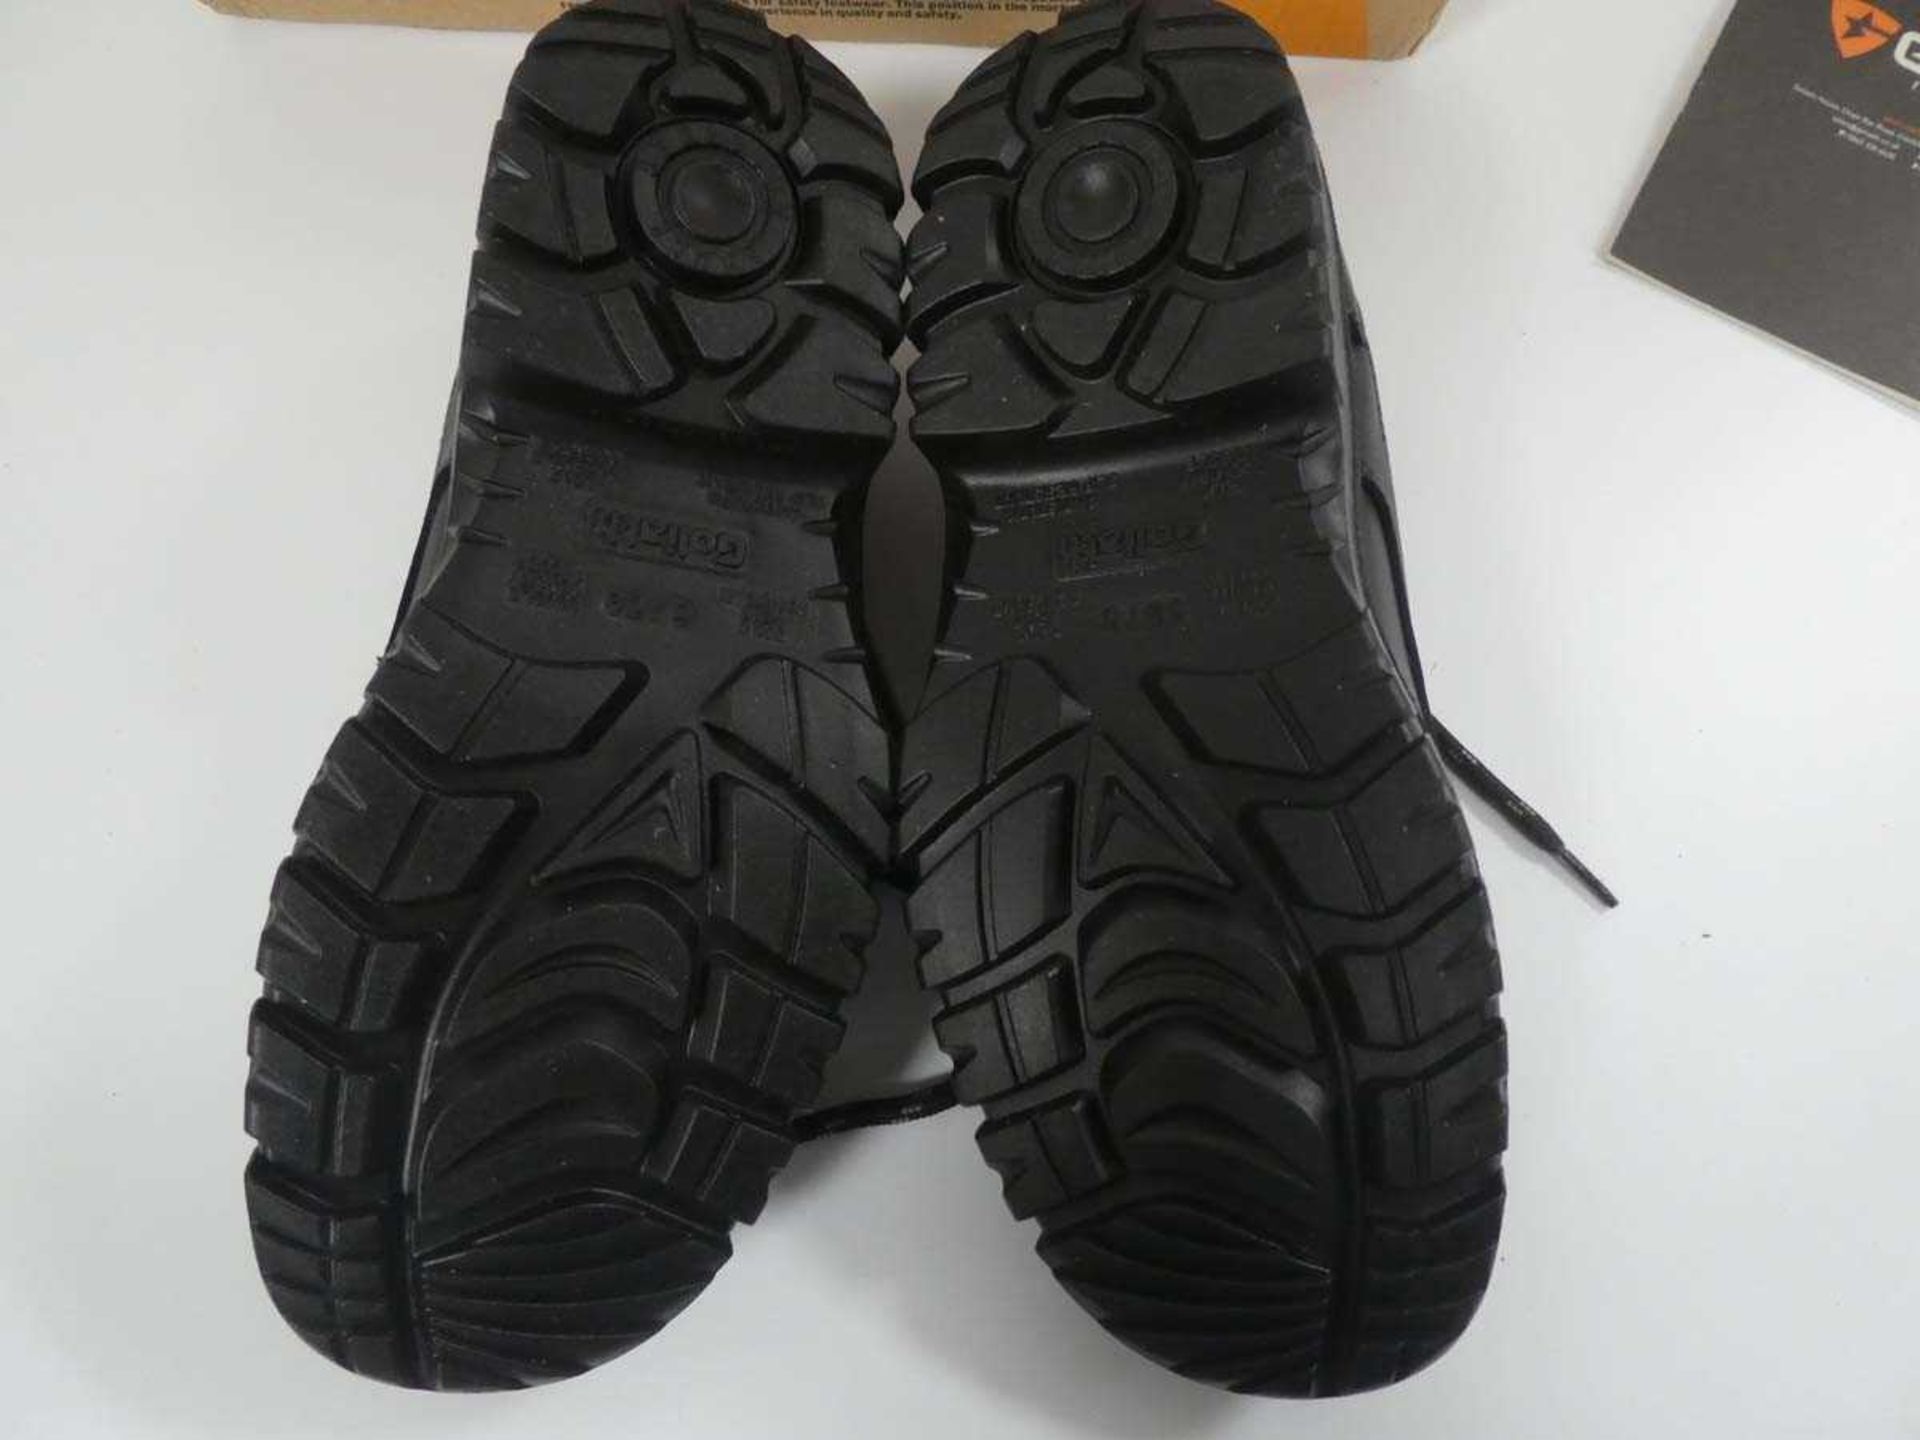 +VAT Boxed pair of Goliath Footwear safety trainer shoes in black with toe caps size 6 - Image 4 of 4